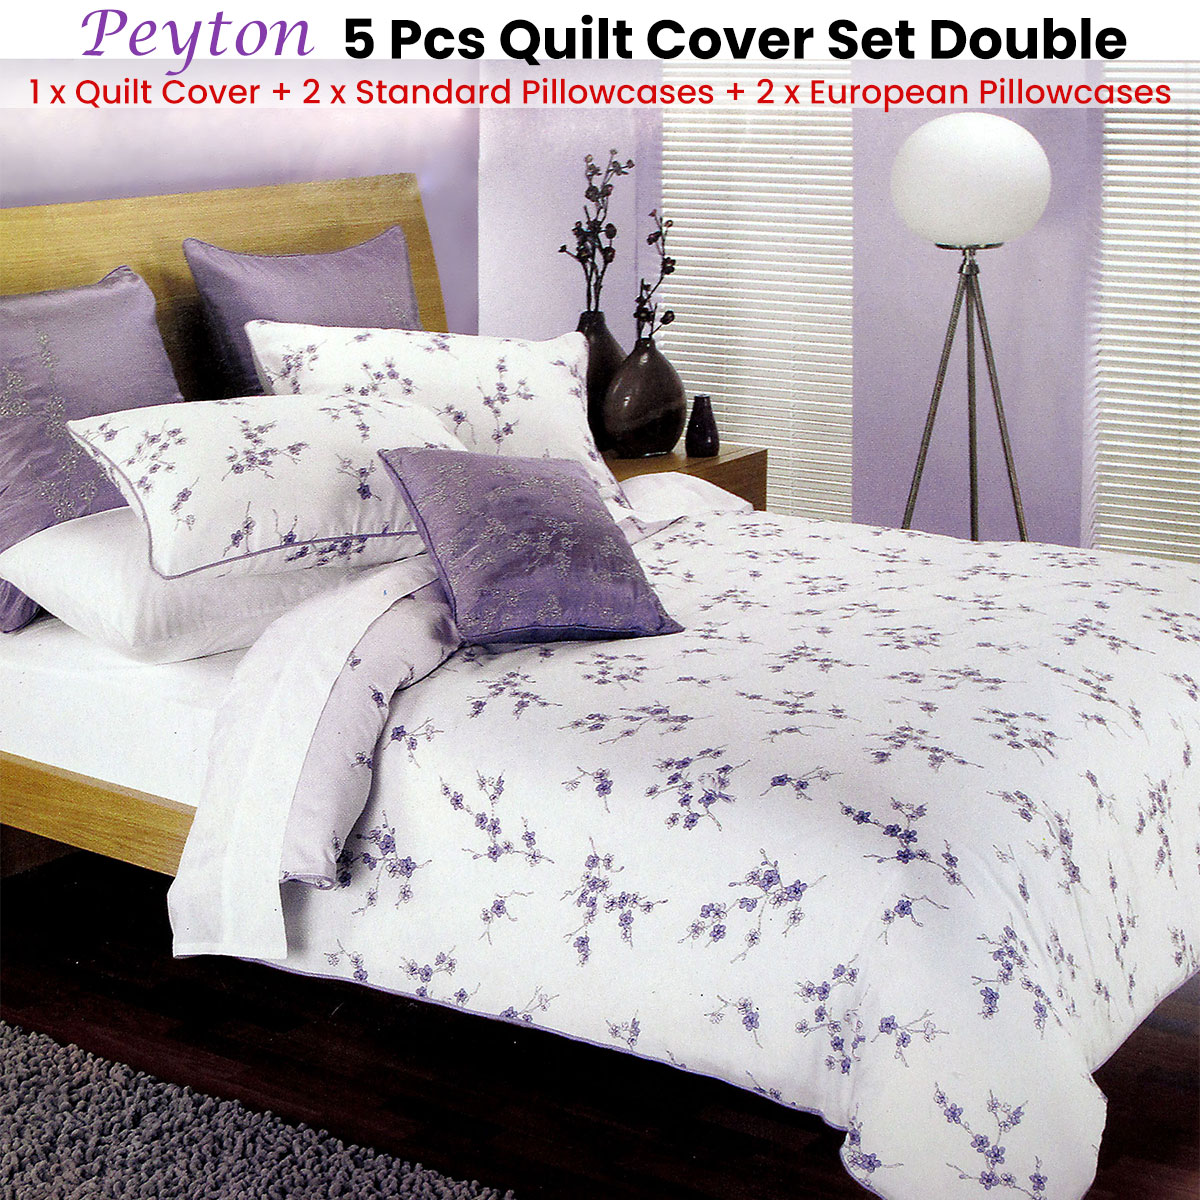 5 Pce Peyton Blossom Easy Care Quilt Cover Set + 2 European Pillowcases Double